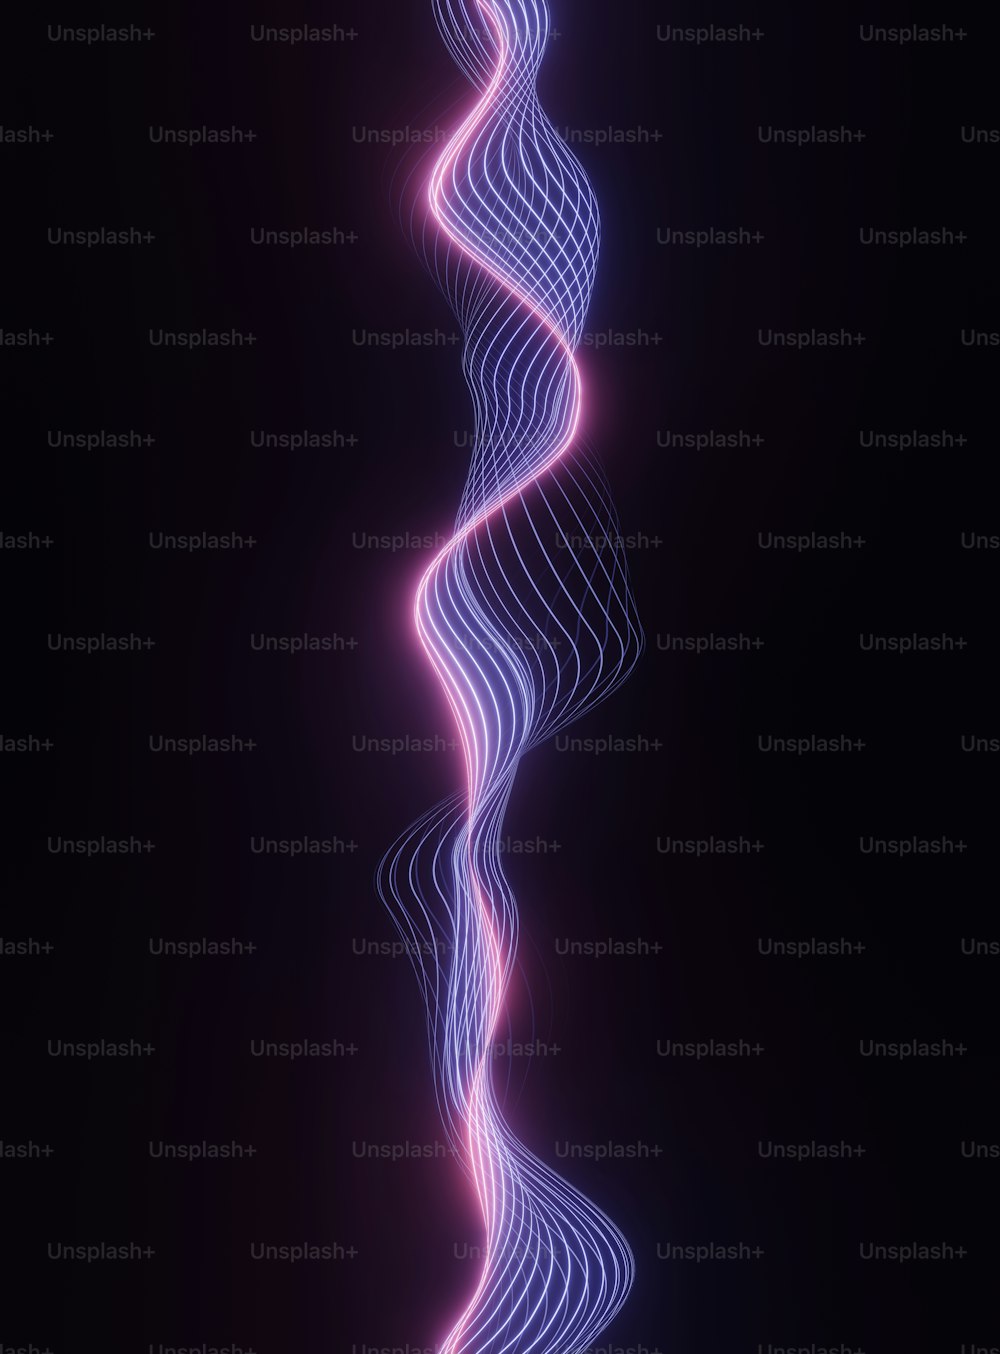 a purple and blue swirl on a black background